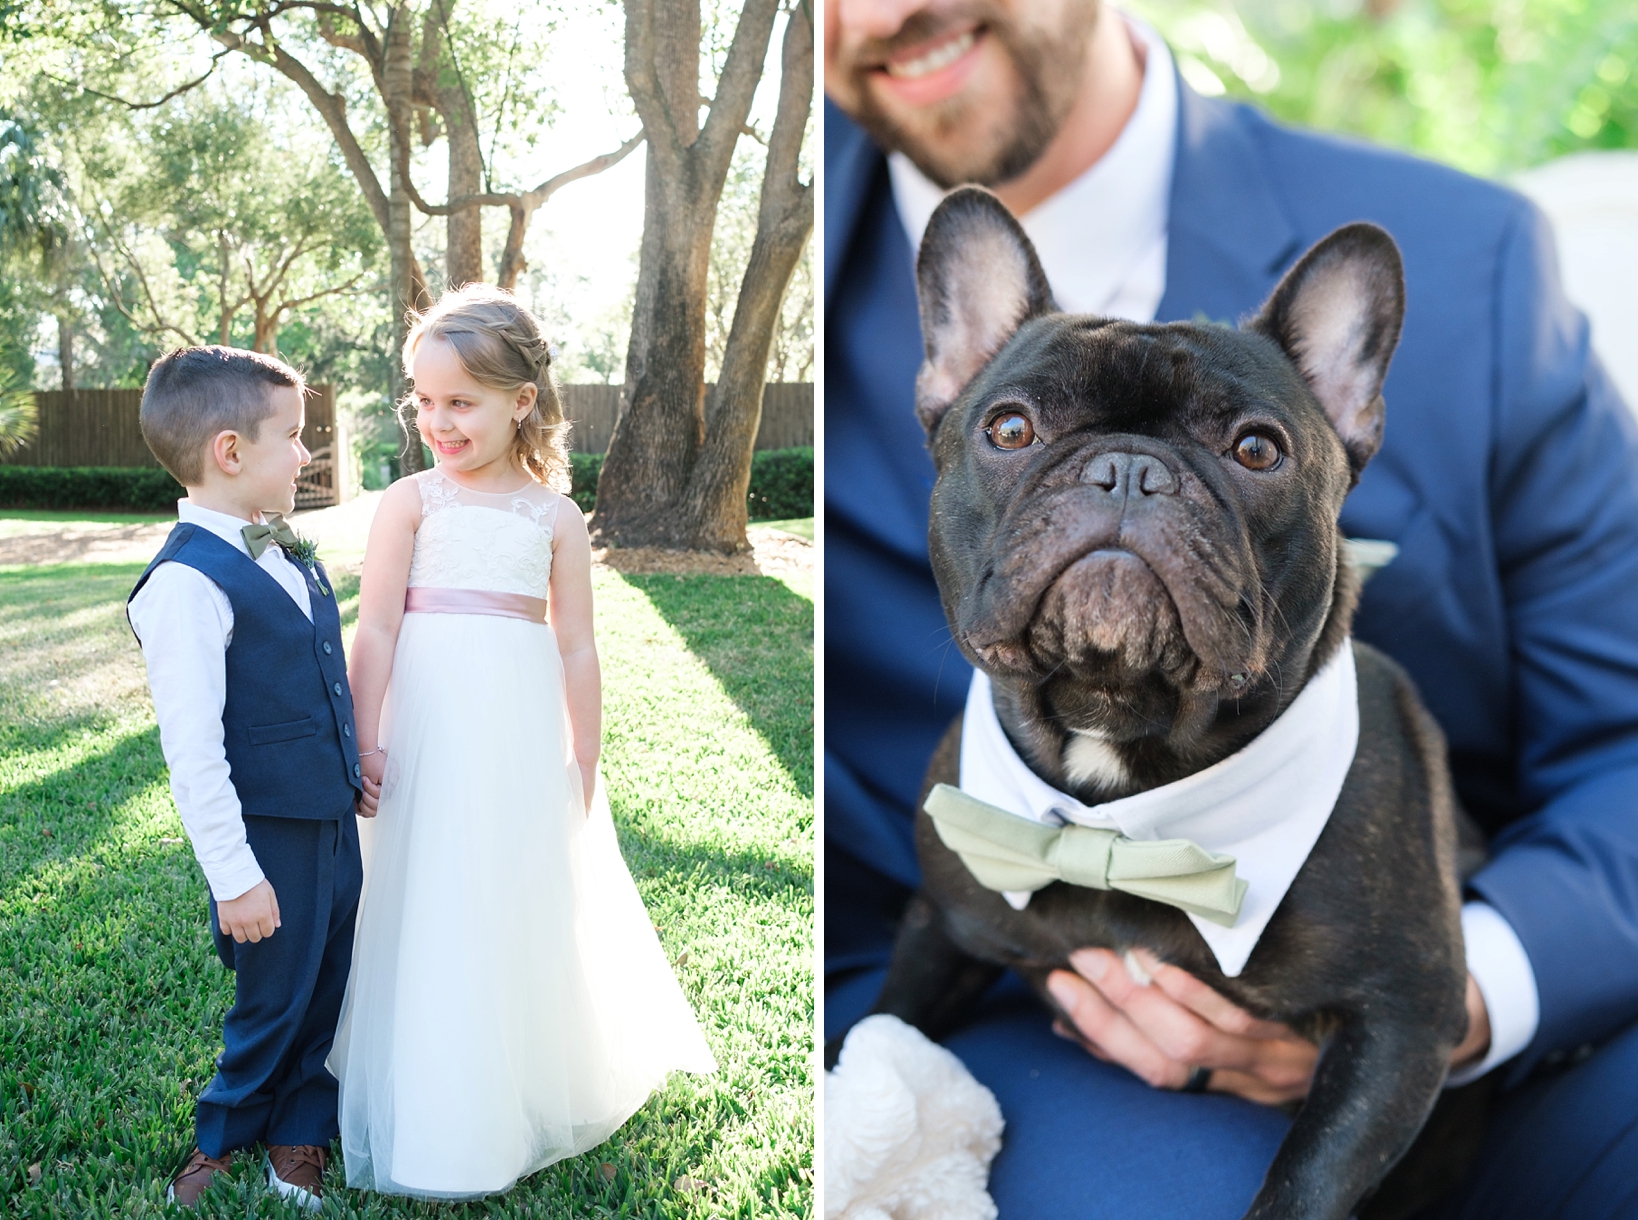 The Flower girl and the ring bearer smile at each other and a french bulldog looks into the camera while wearing a necktie